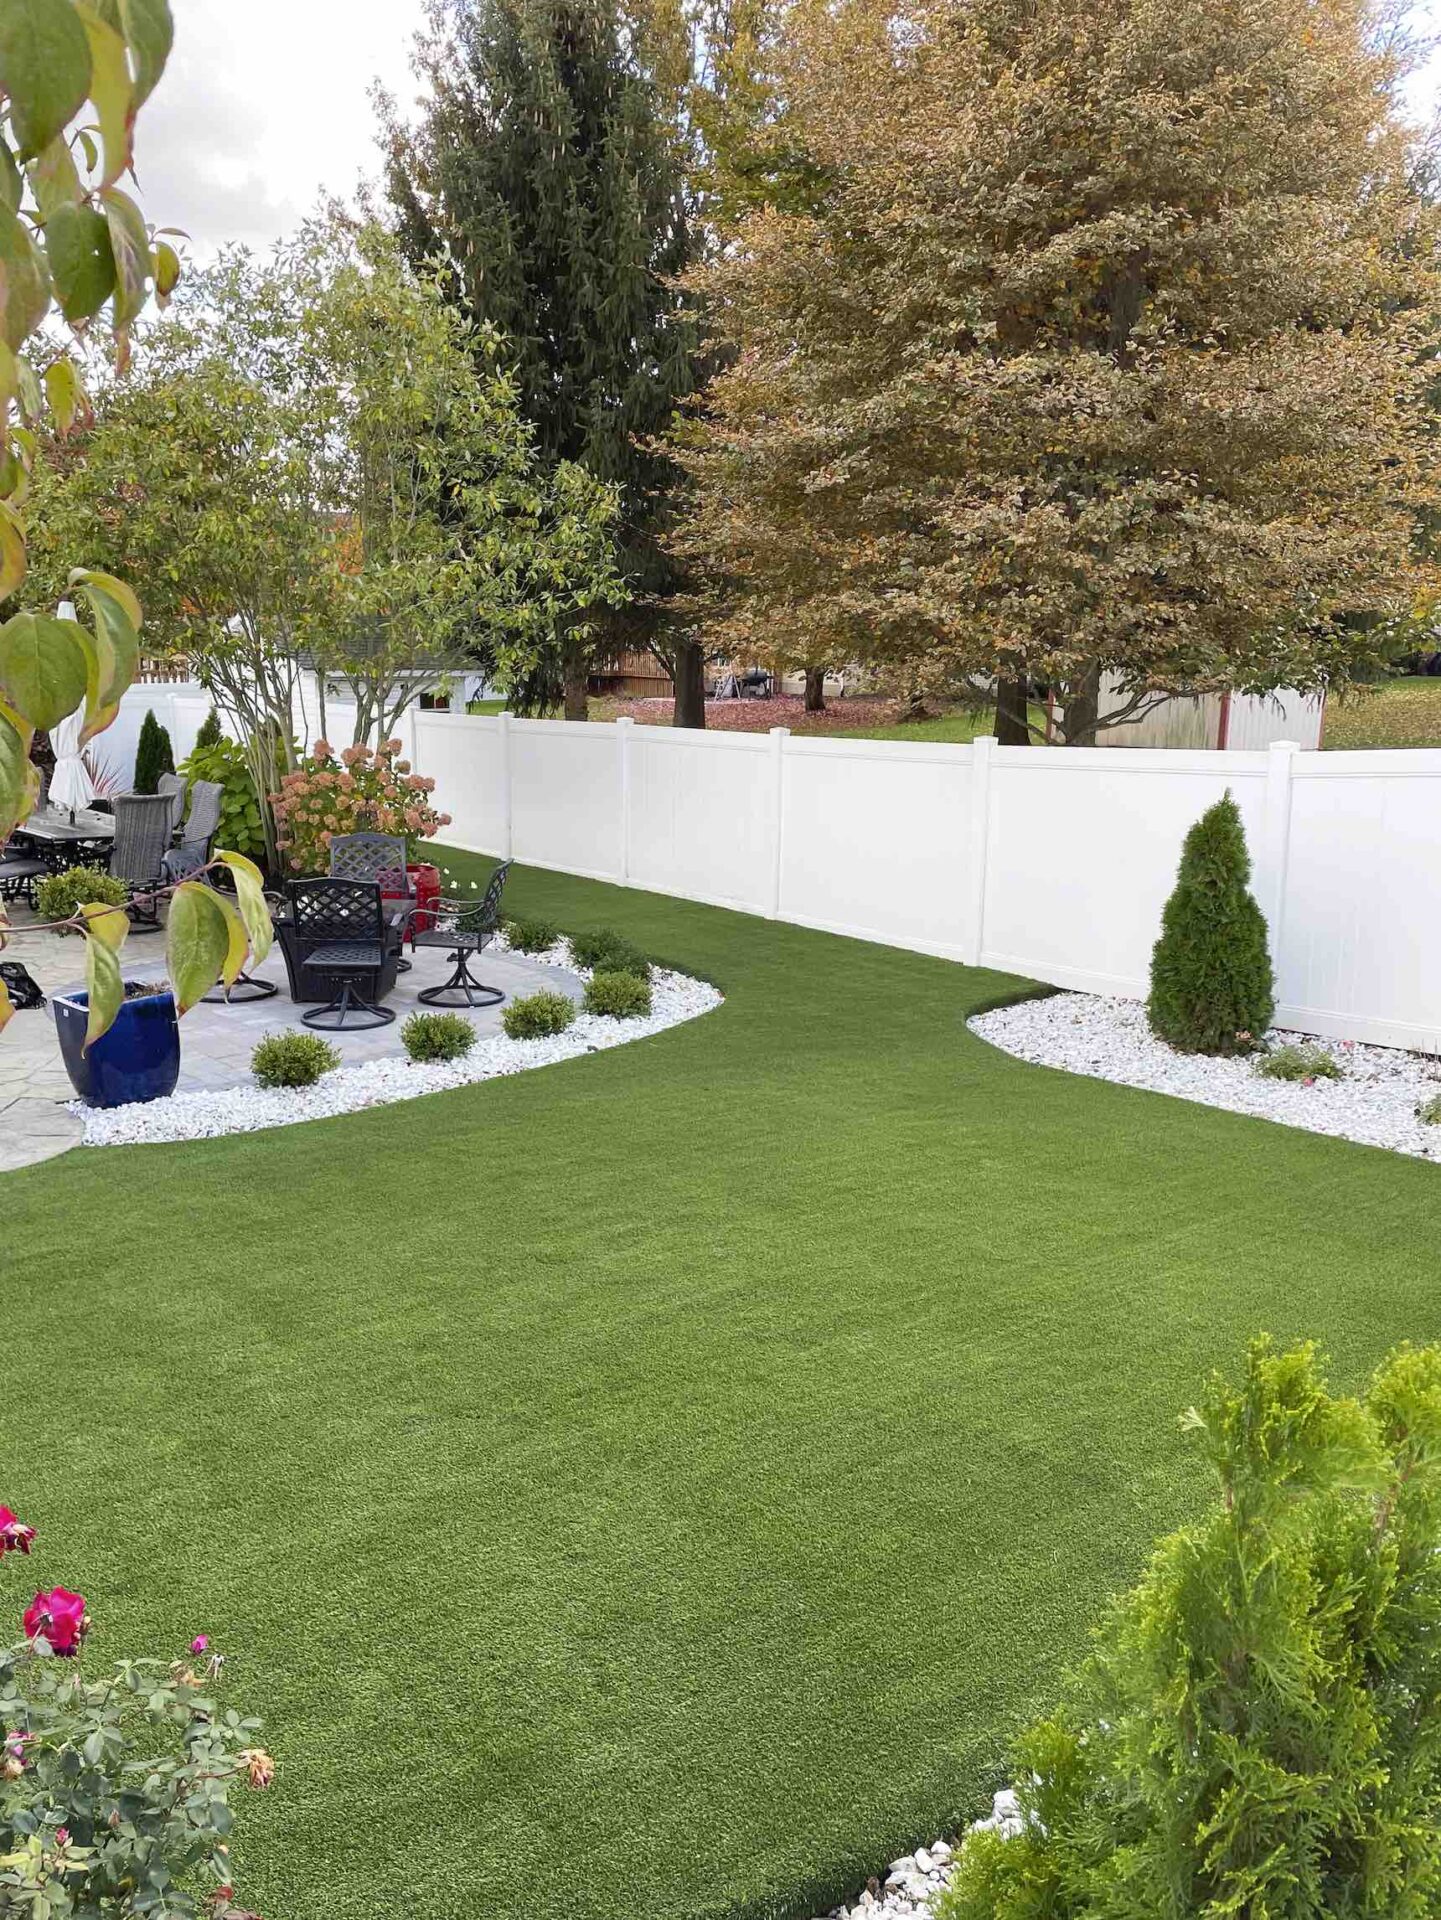 This image displays a neatly manicured garden with vibrant green artificial turf, surrounded by a white fence, various plants, trees, and garden furniture.